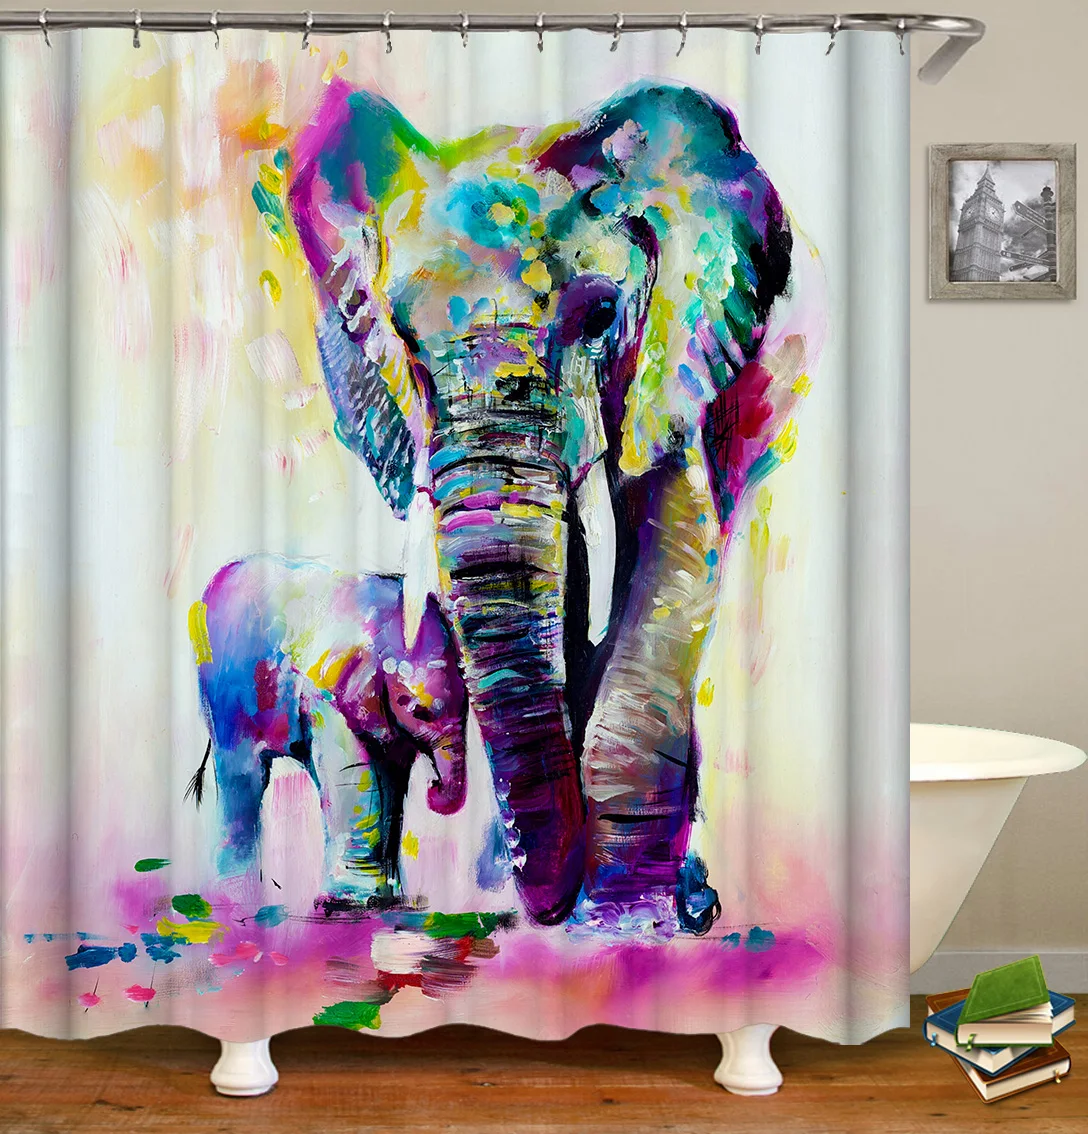 

Drop Shipping 2021 Most Popular Minimalist Design Painted Elephant, 180*180cm Size Customized Design Shower Curtain#, Customized color